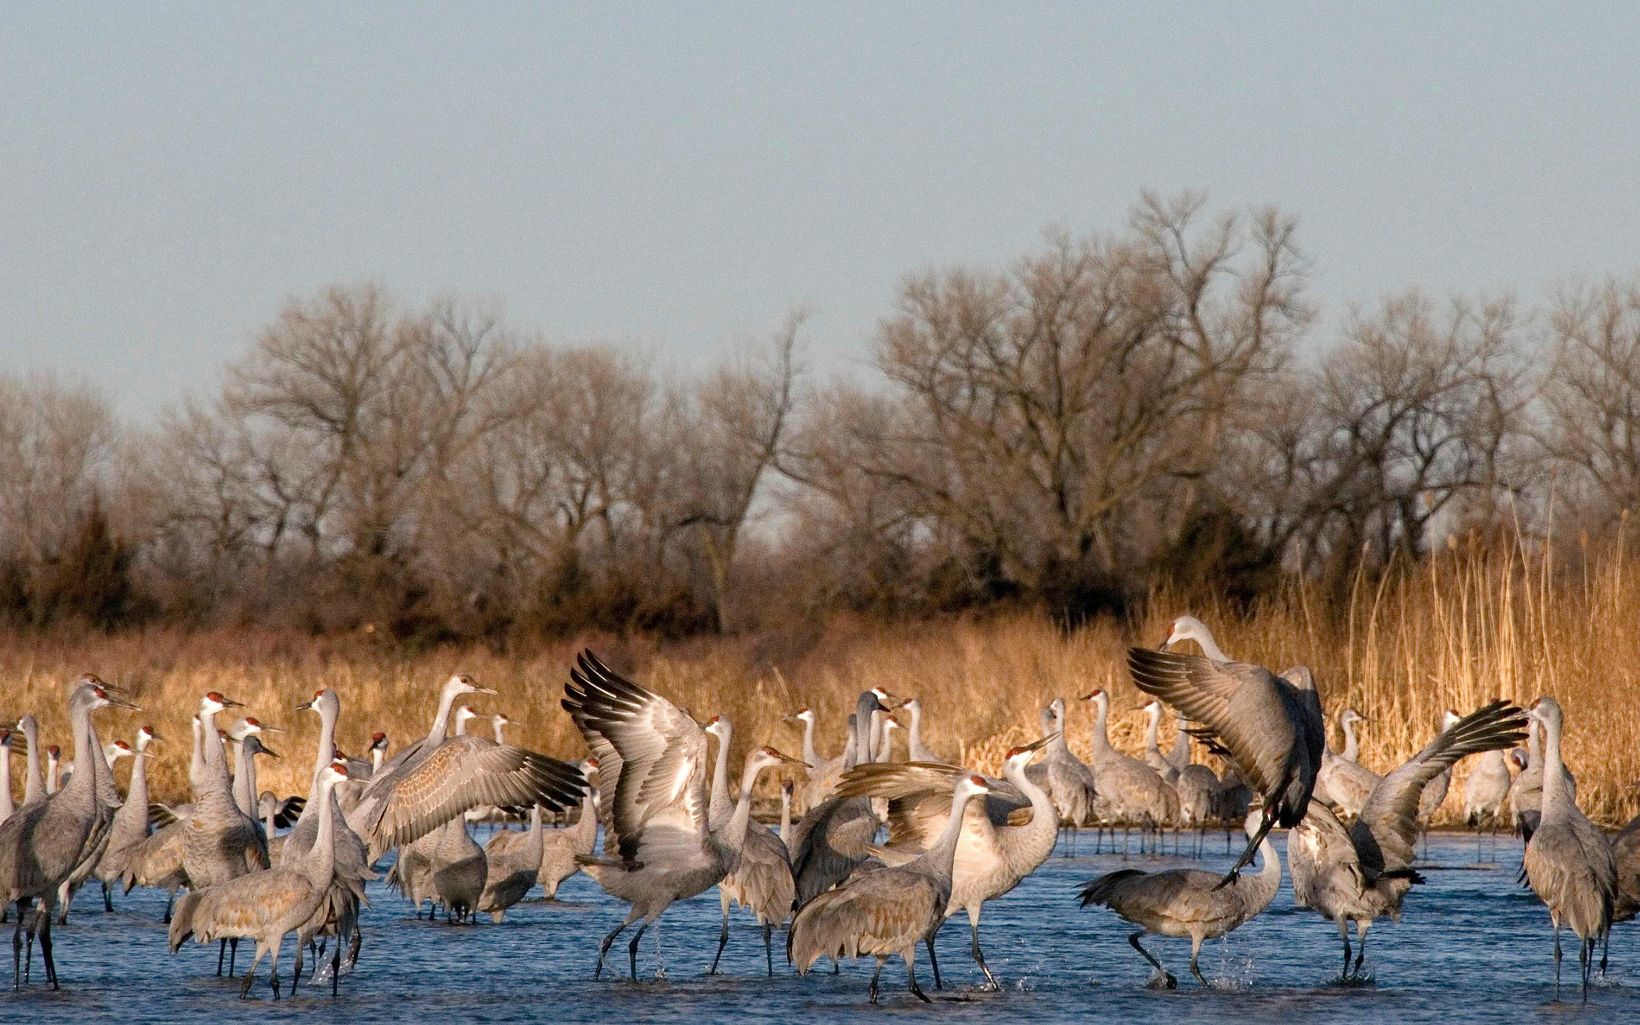 Sandhill Cranes   Sandhill cranes refuel at the Platte River in south central Nebraska during their annual migration. © Chris Hezler/The Nature Conservancy